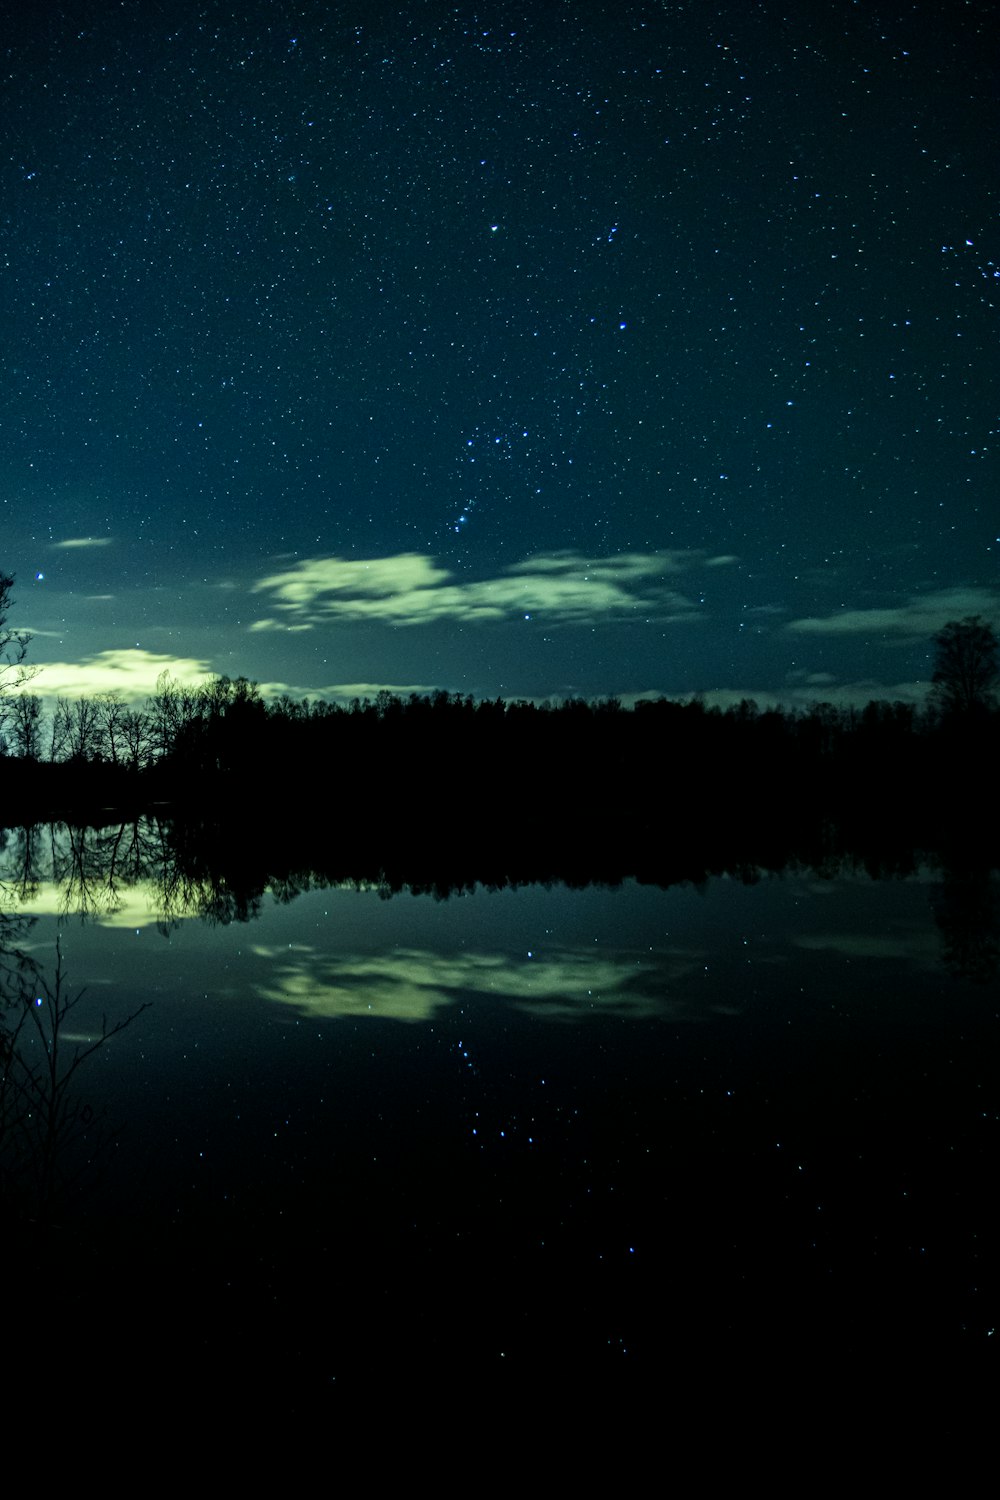 the night sky is reflected in the water